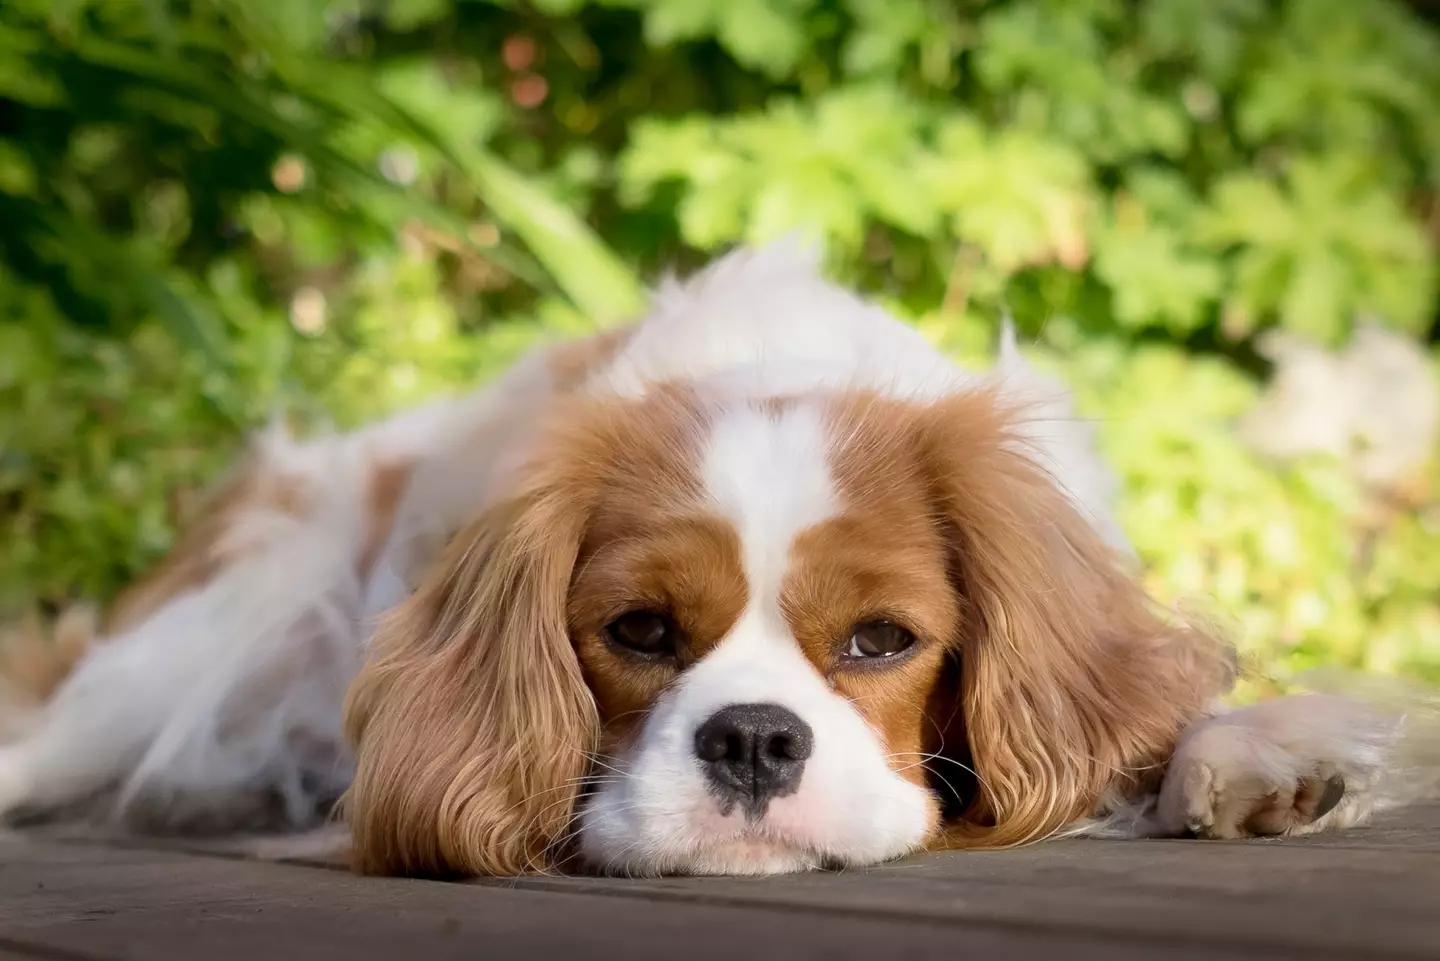 The leading cause of death of Cavalier King Charles Spaniels is MVD (Getty stock image)